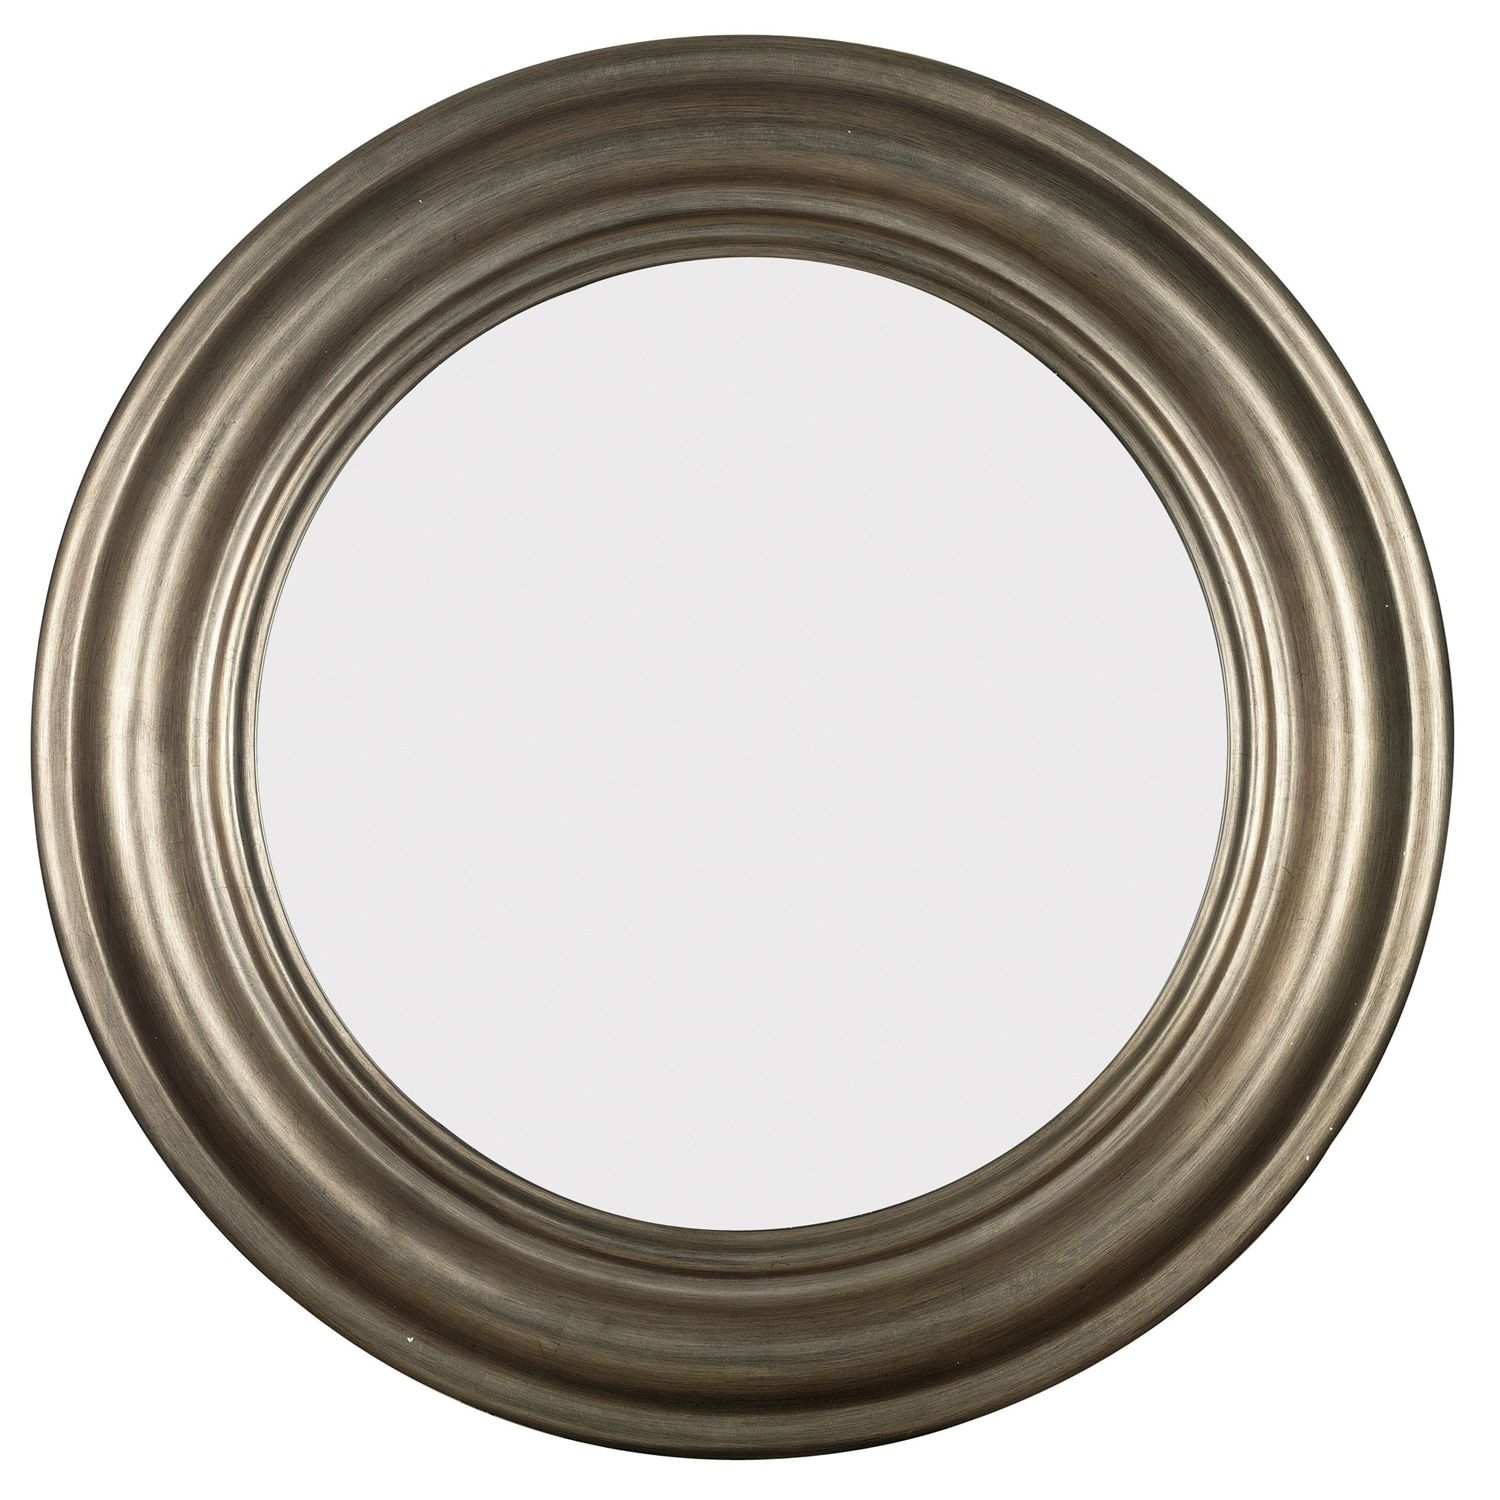 Pasco Round Antique Silver Wall Mirror – 13925218 – Overstock Pertaining To Silver Leaf Round Wall Mirrors (View 14 of 15)